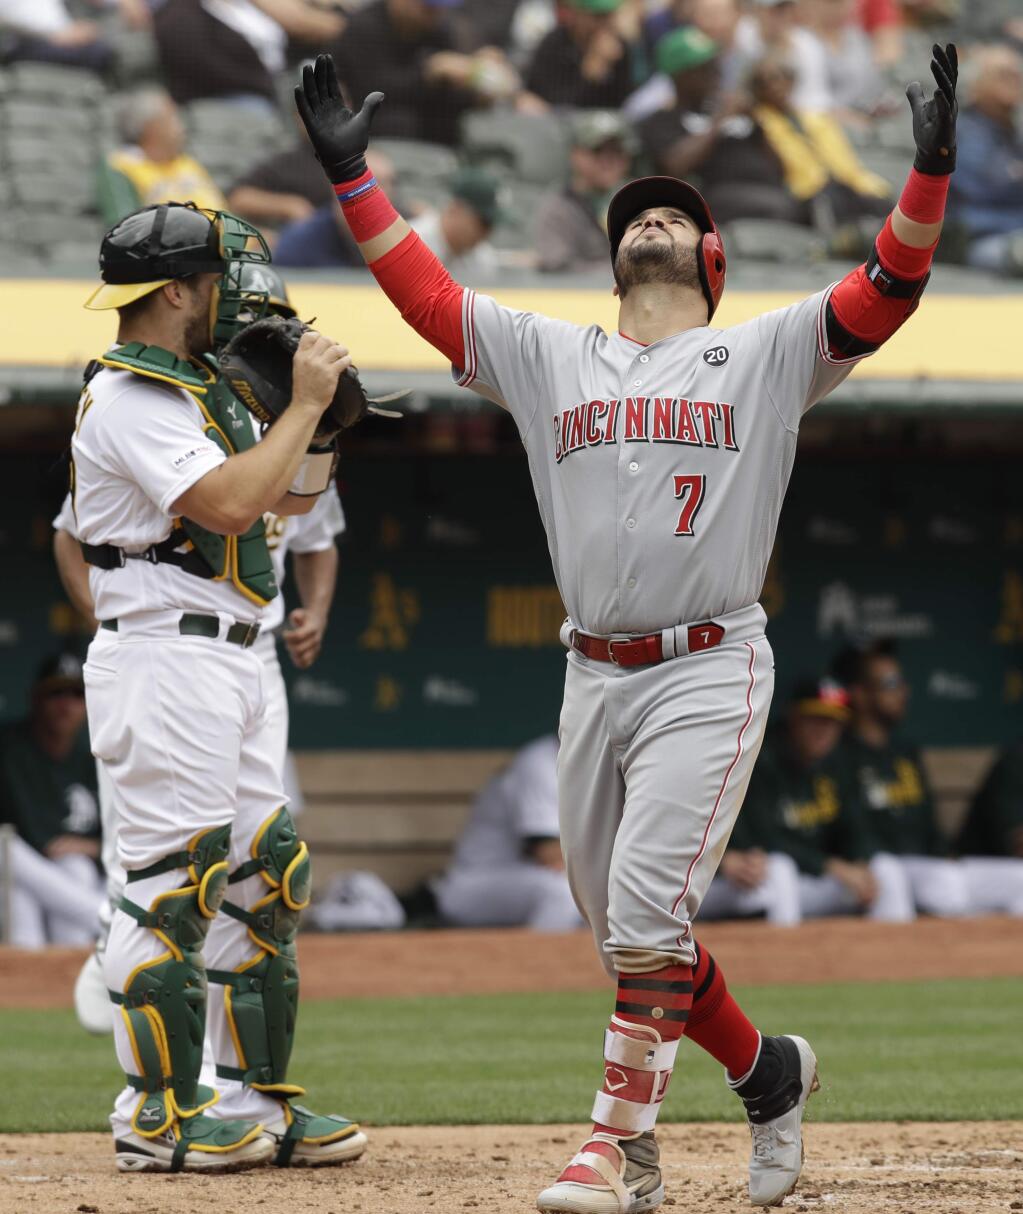 The Cincinnati Reds' Eugenio Suarez, right, celebrates as he crosses home plate after hitting a home run off the Oakland Athletics' Chris Bassitt in the third inning Thursday, May 9, 2019, in Oakland. (AP Photo/Ben Margot)